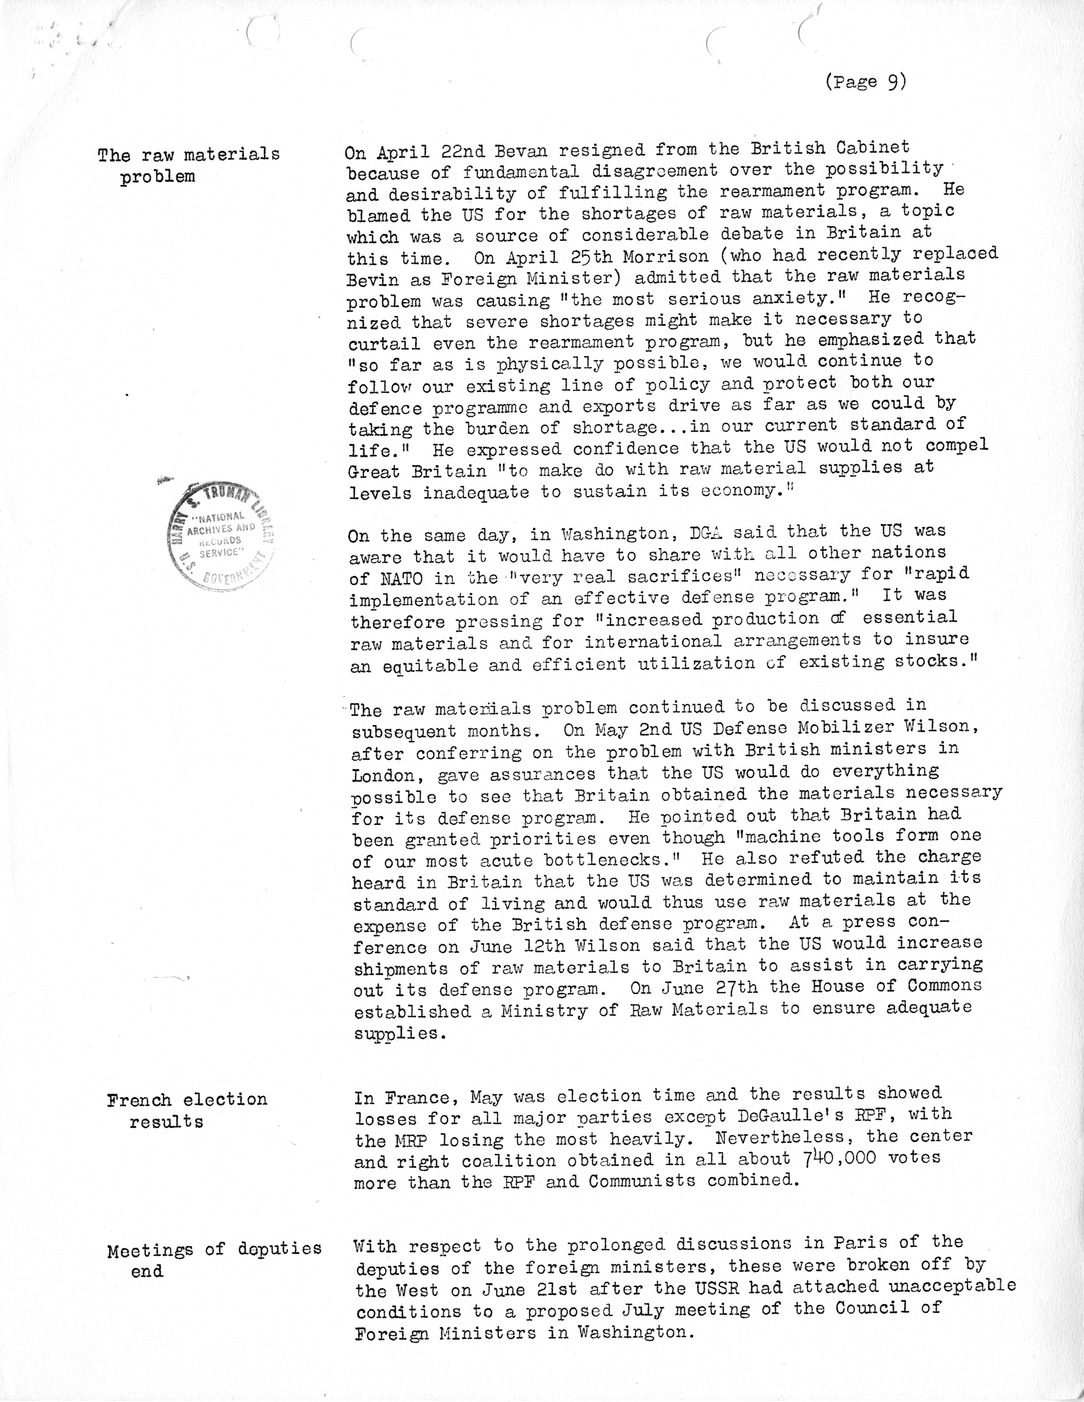 SYNOPSIS I, Miscellaneous Developments in Europe, January-June 1951